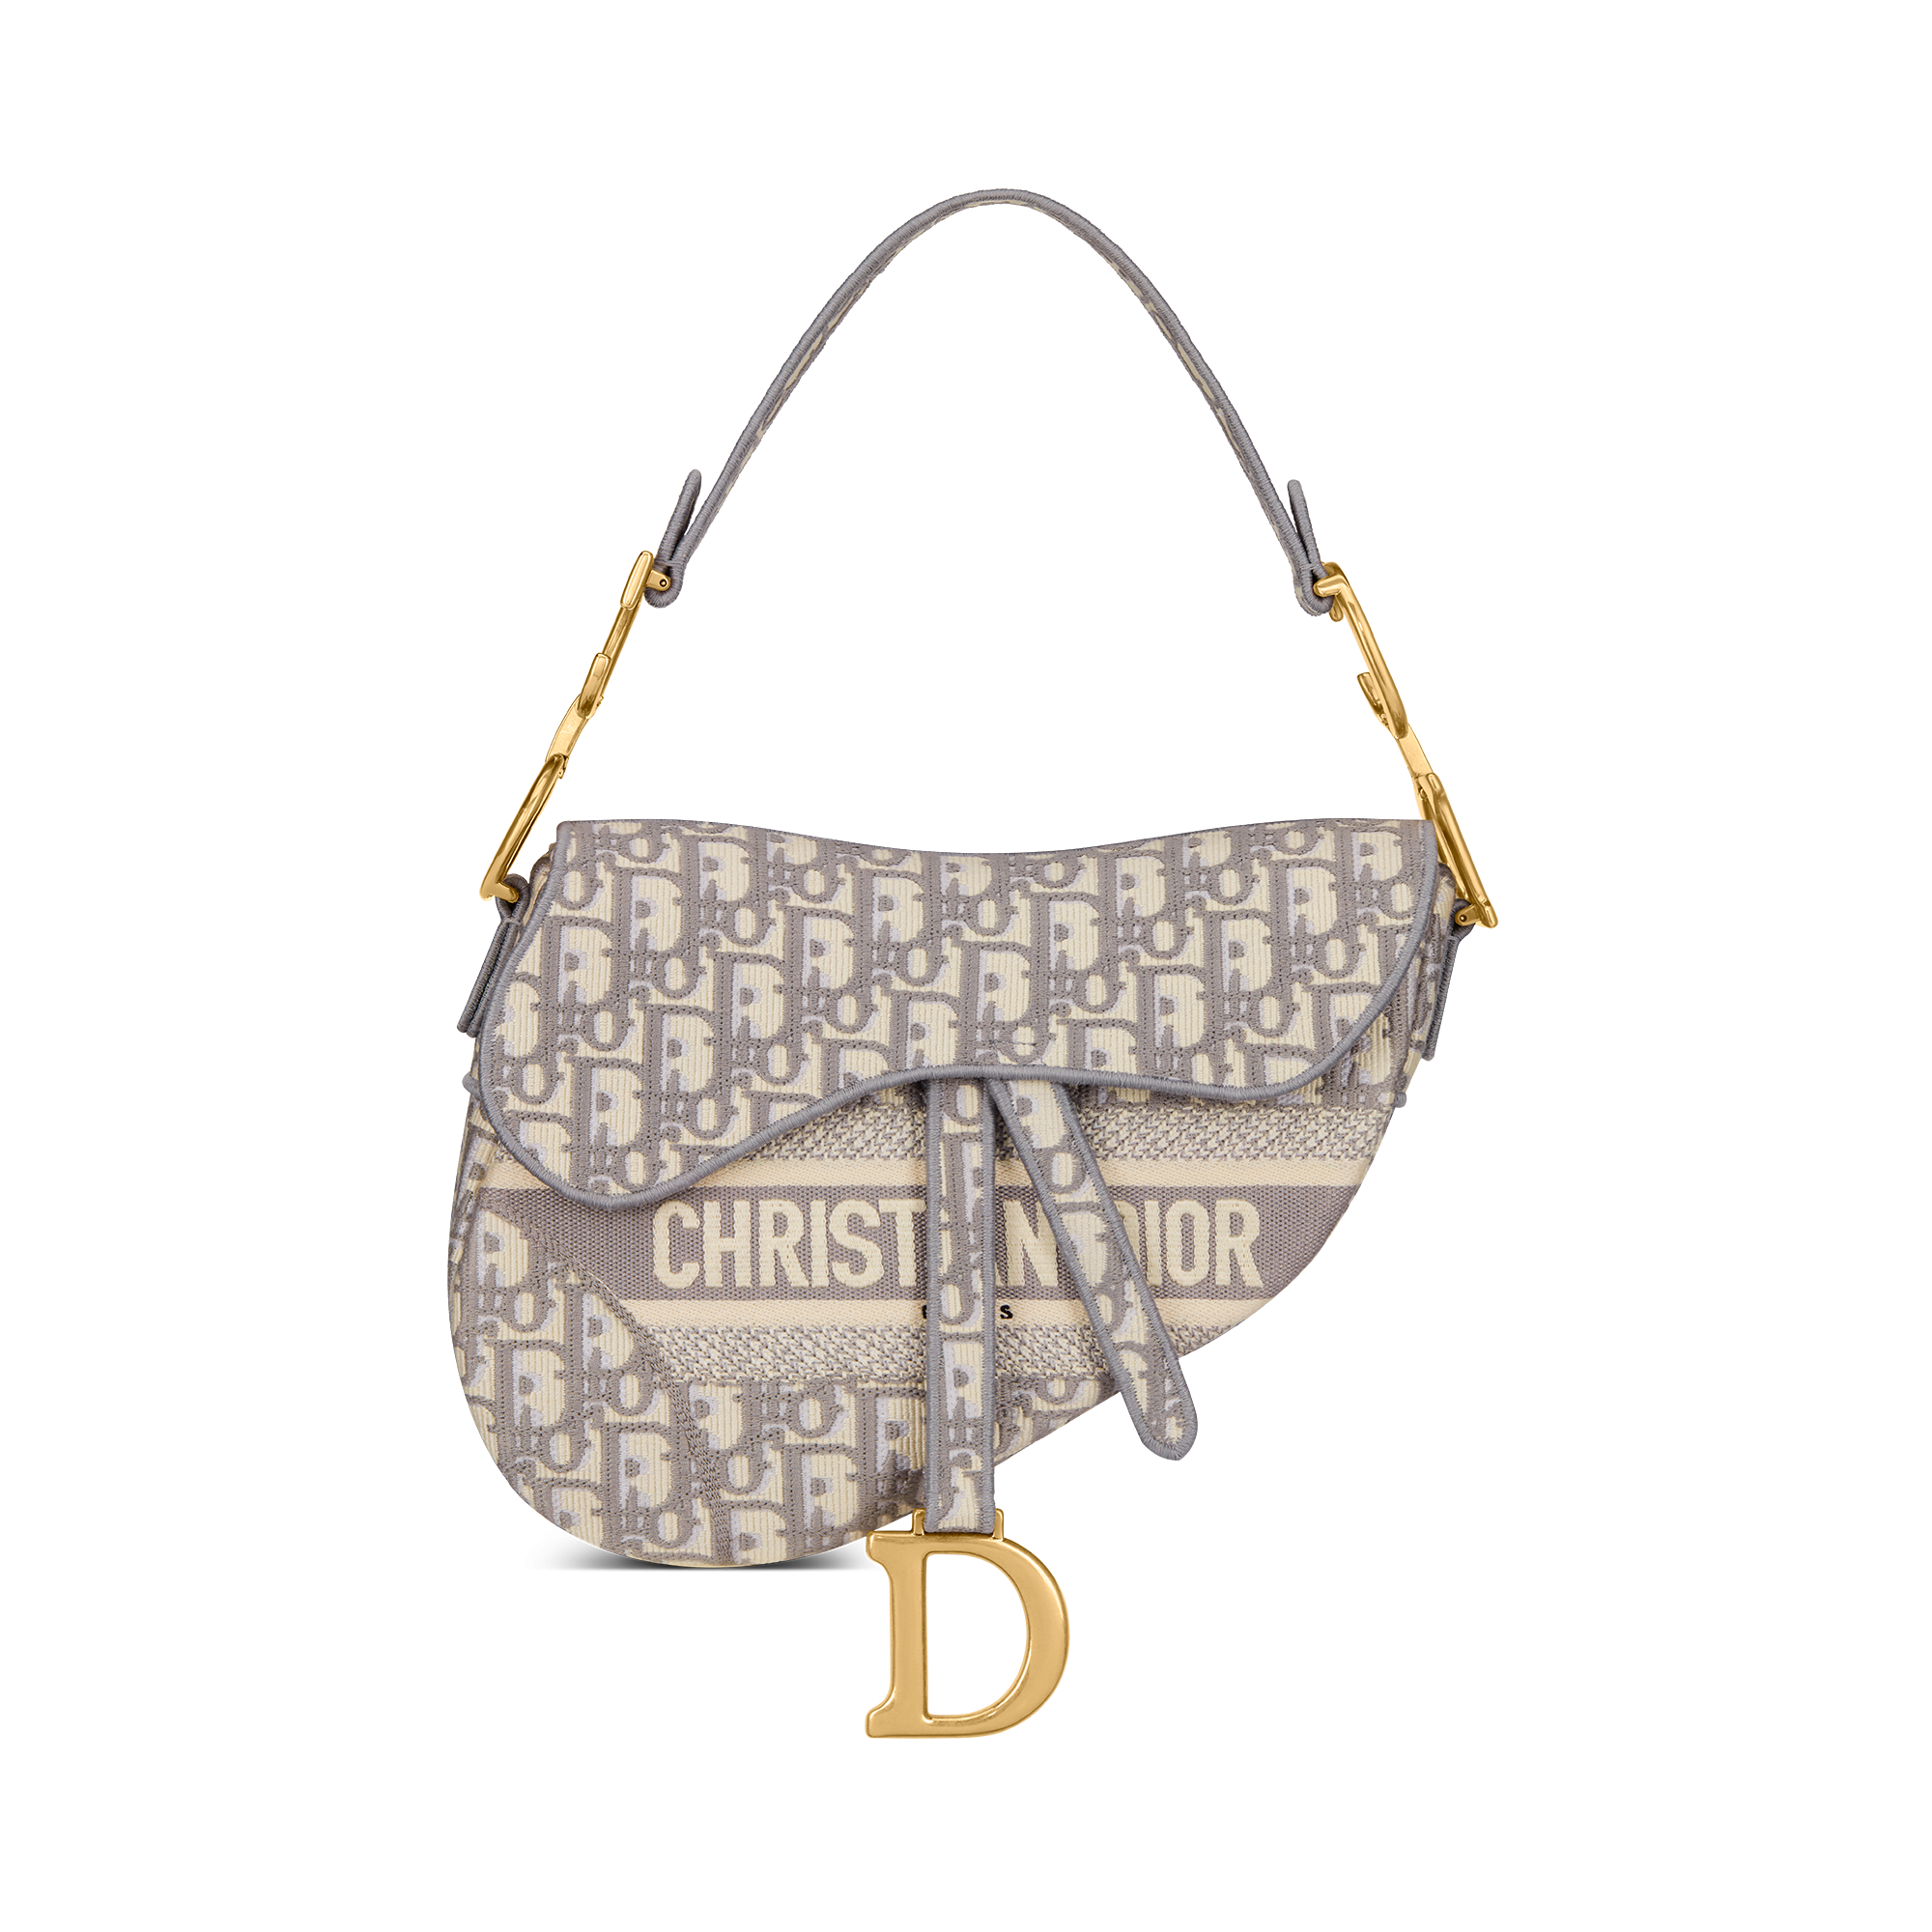 7 Personalized Leather Goods: Monogrammed Dior Bags and More